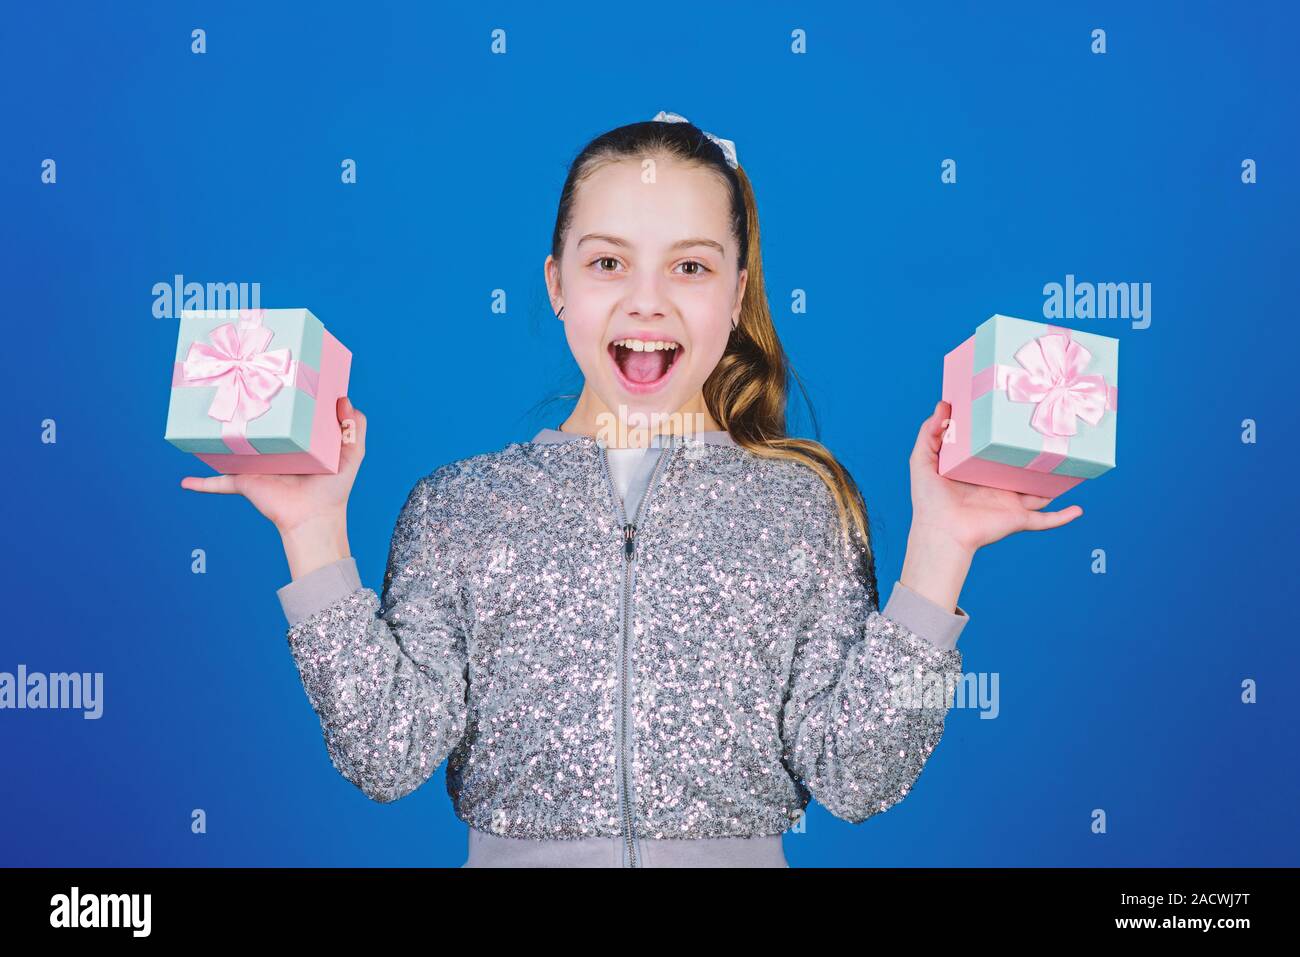 Girl with gift boxes blue background. Black friday. Shopping day. Cute child carry gift boxes. Surprise gift box. Birthday wish list. World of happiness. Pick bonus. Special happens every day. Stock Photo